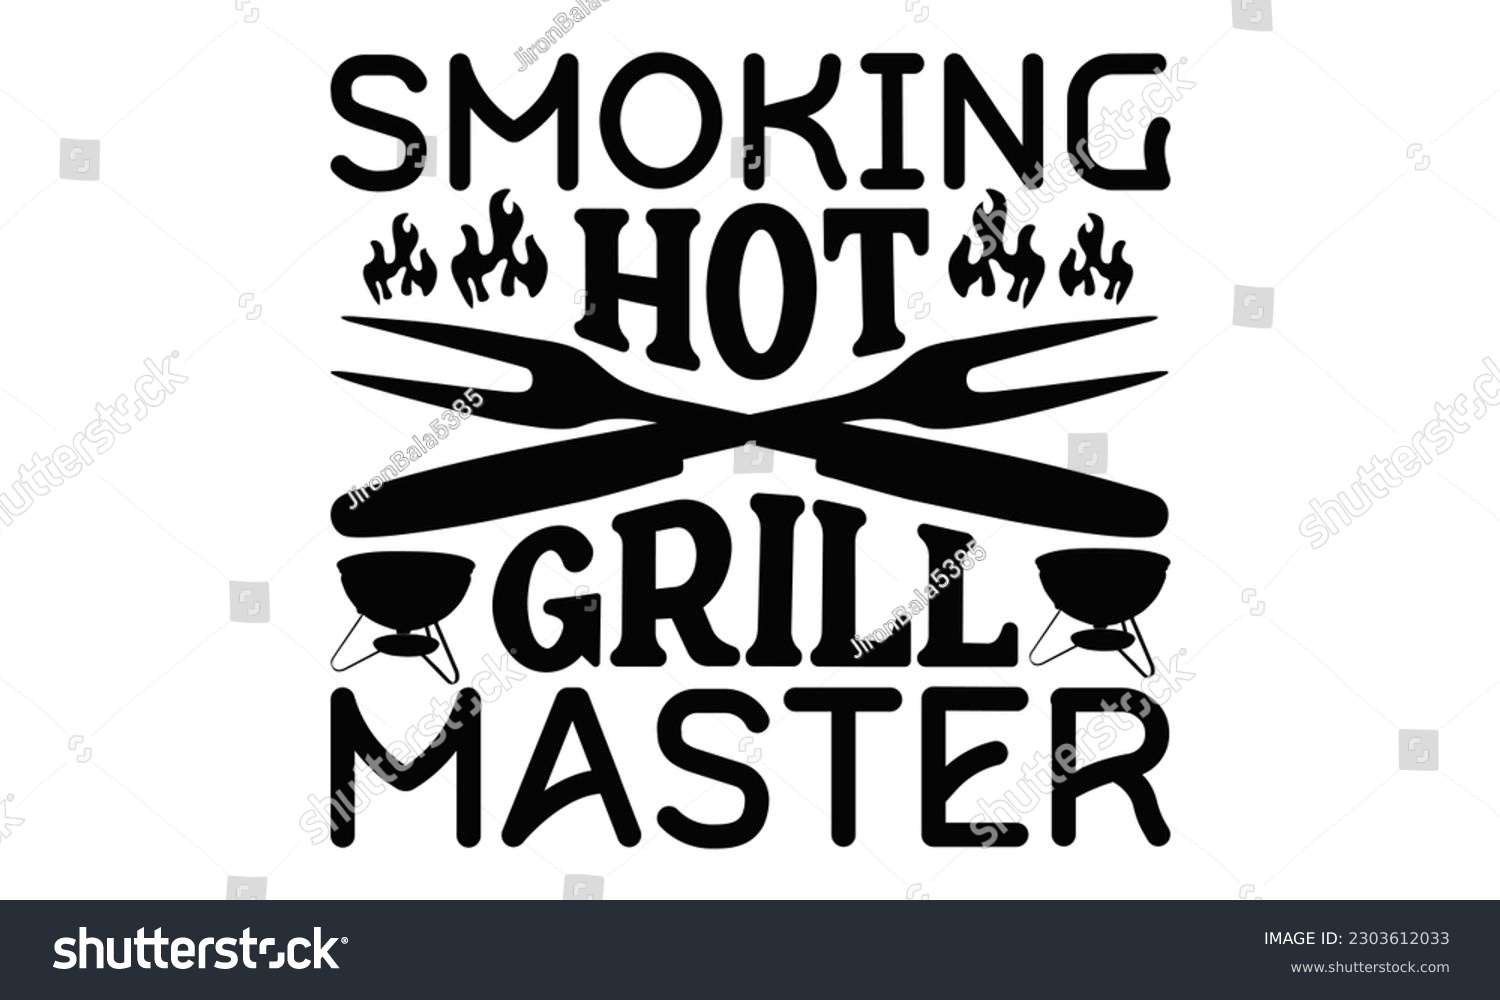 SVG of Smoking Hot Grill Master - Barbecue SVG Design, Hand drawn vintage hand lettering, EPS, Files for Cutting, Illustration for prints on t-shirts, bags, posters, cards and Mug.
 svg